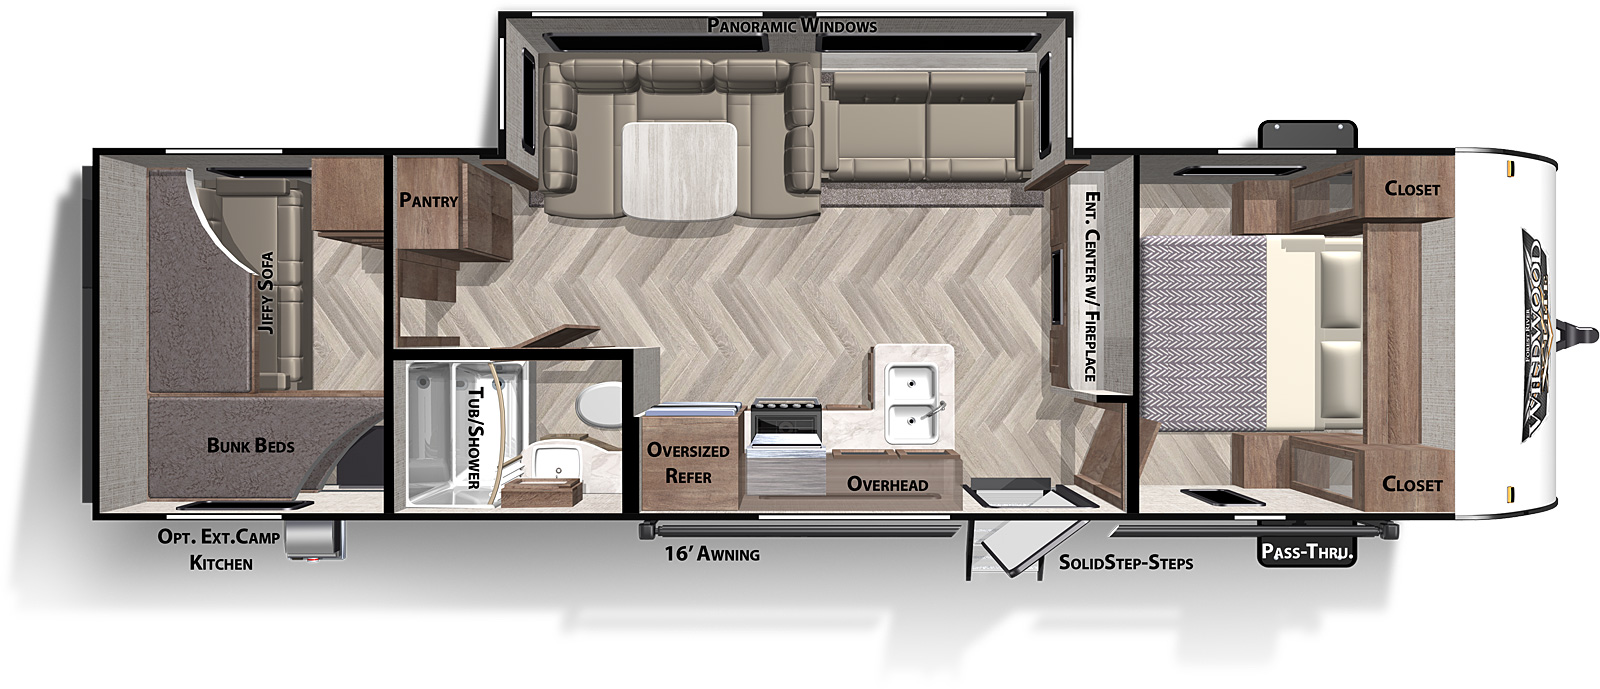 X-Lite Northwest 273QBXL floorplan. The 273QBXL has one slide out and one entry door.